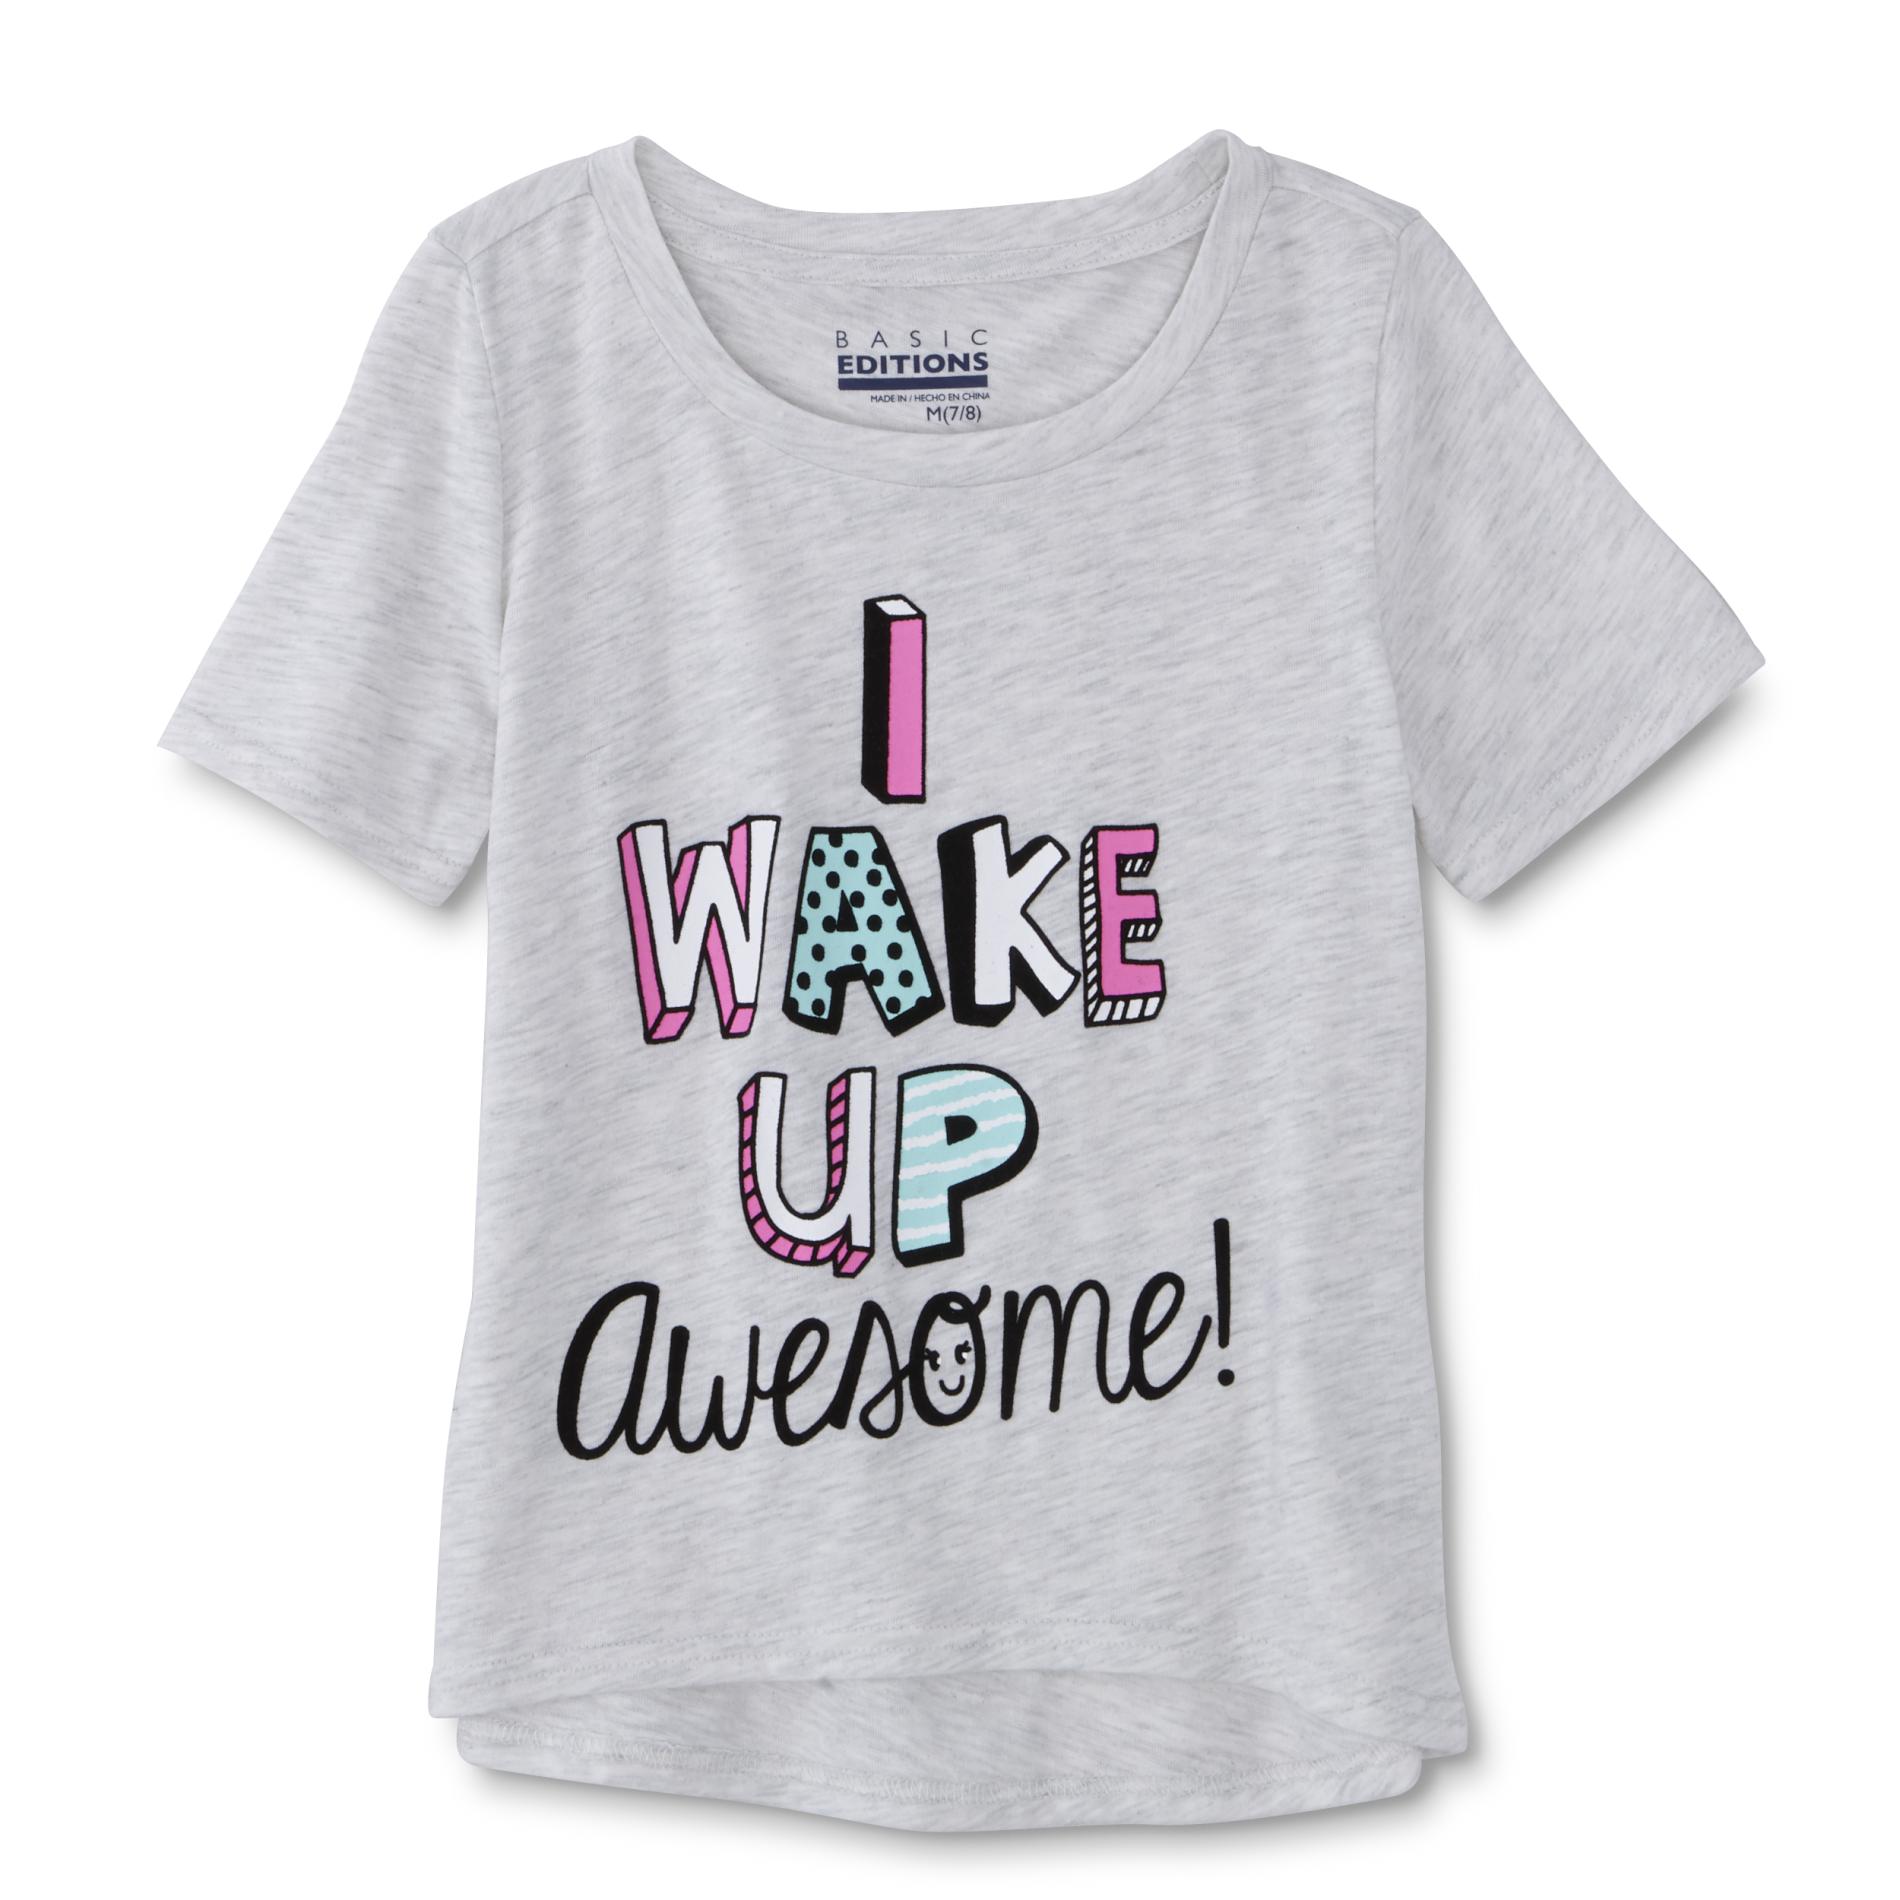 Basic Editions Girl's Graphic T-Shirt - I Wake Up Awesome